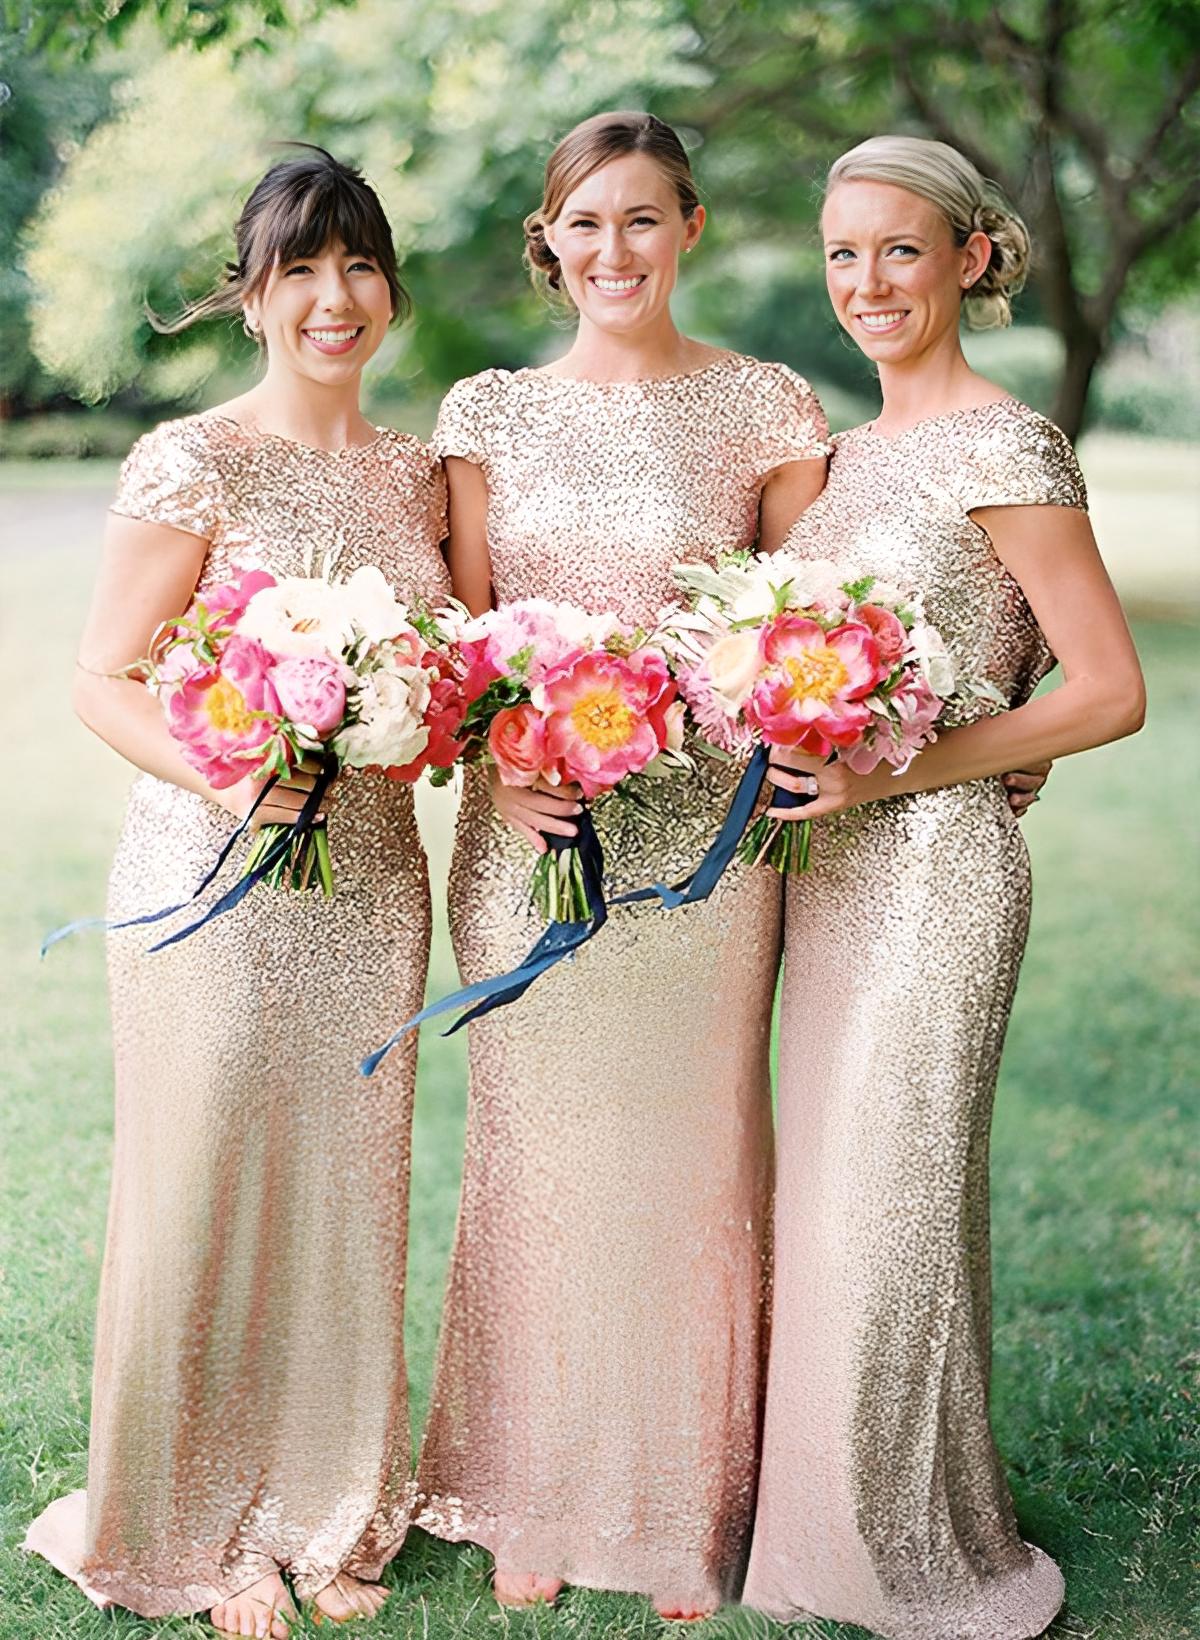 Sheath/Column Scoop Neck Sequined Sweep Train Bridesmaid Dresses With Sequins